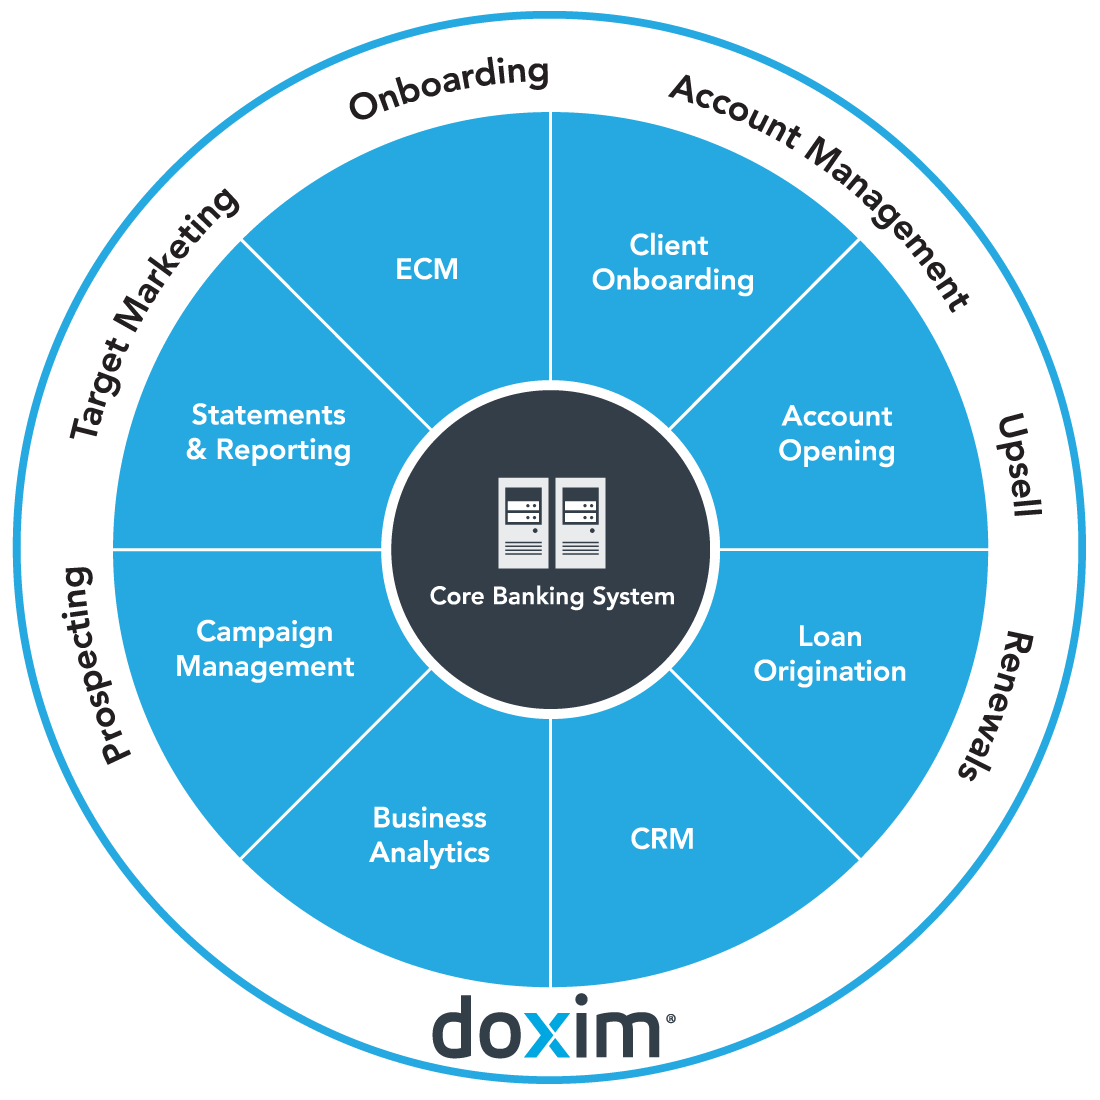 Doxim Customer engagement plaform Included: Campaign management, business analytics, CRM, Loan origination, Account opening, Client onboarding, ECM and statement & reporting